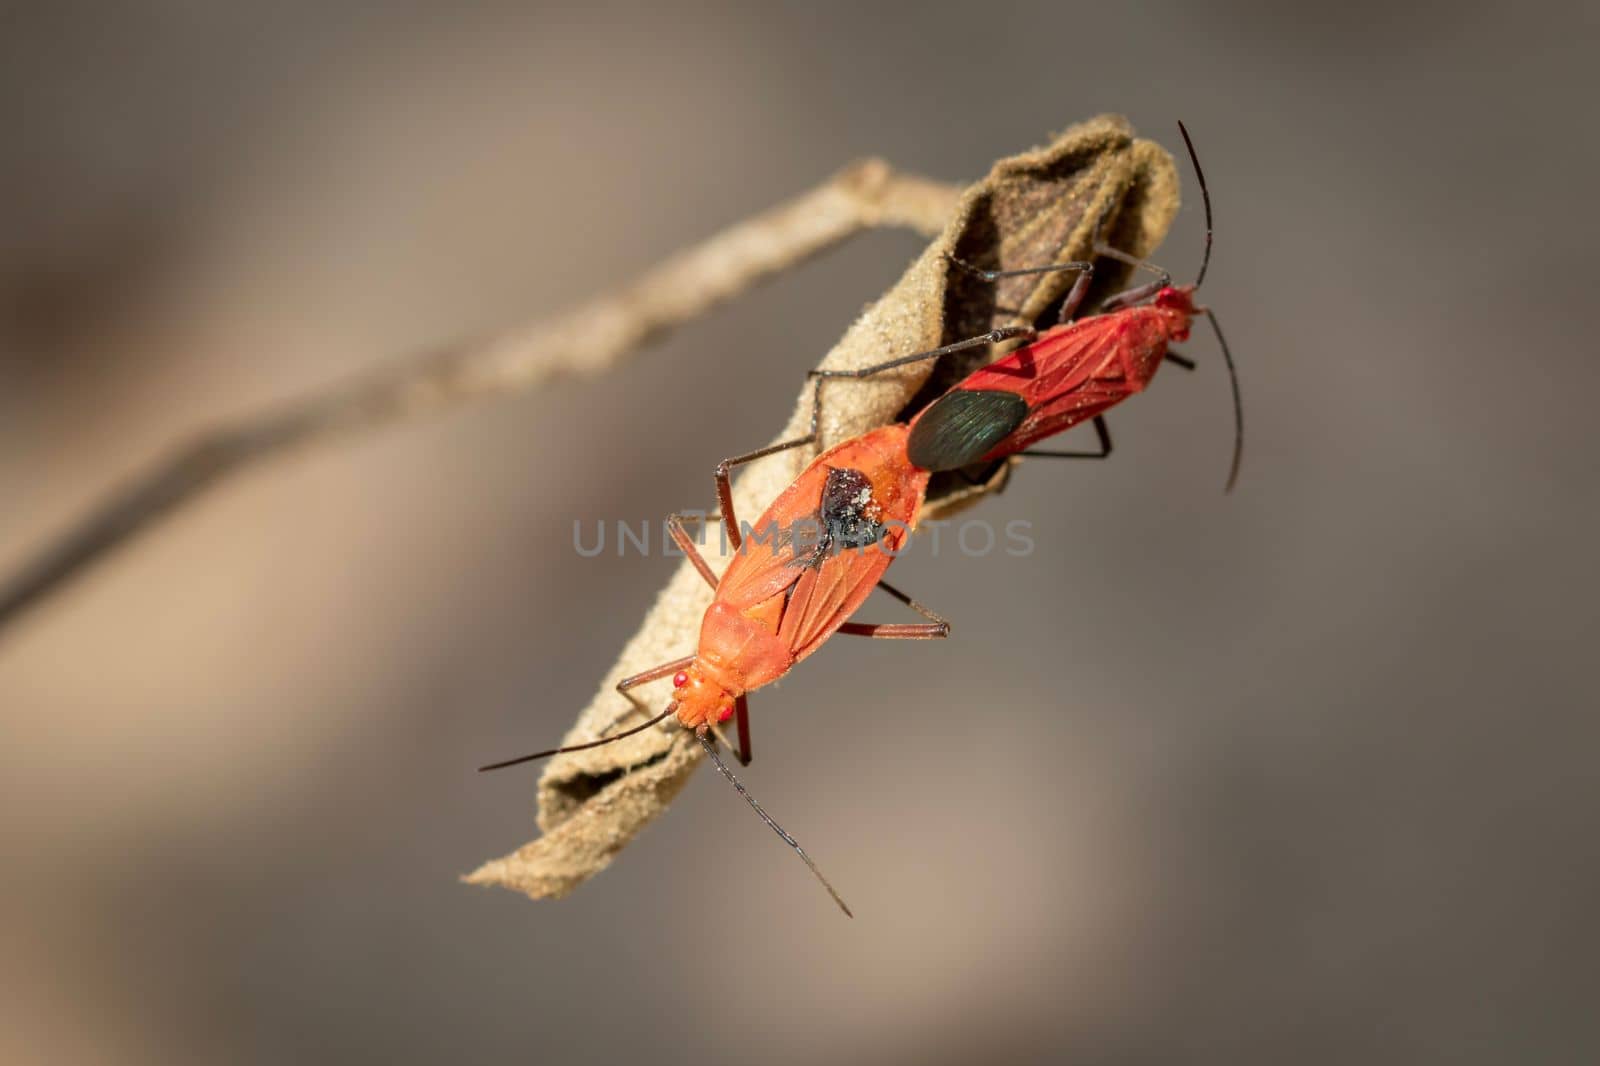 Image of Red cotton bug (Dysdercus cingulatus) on the leaf on a natural background. Insect. Animal. Pyrrhocoridae.